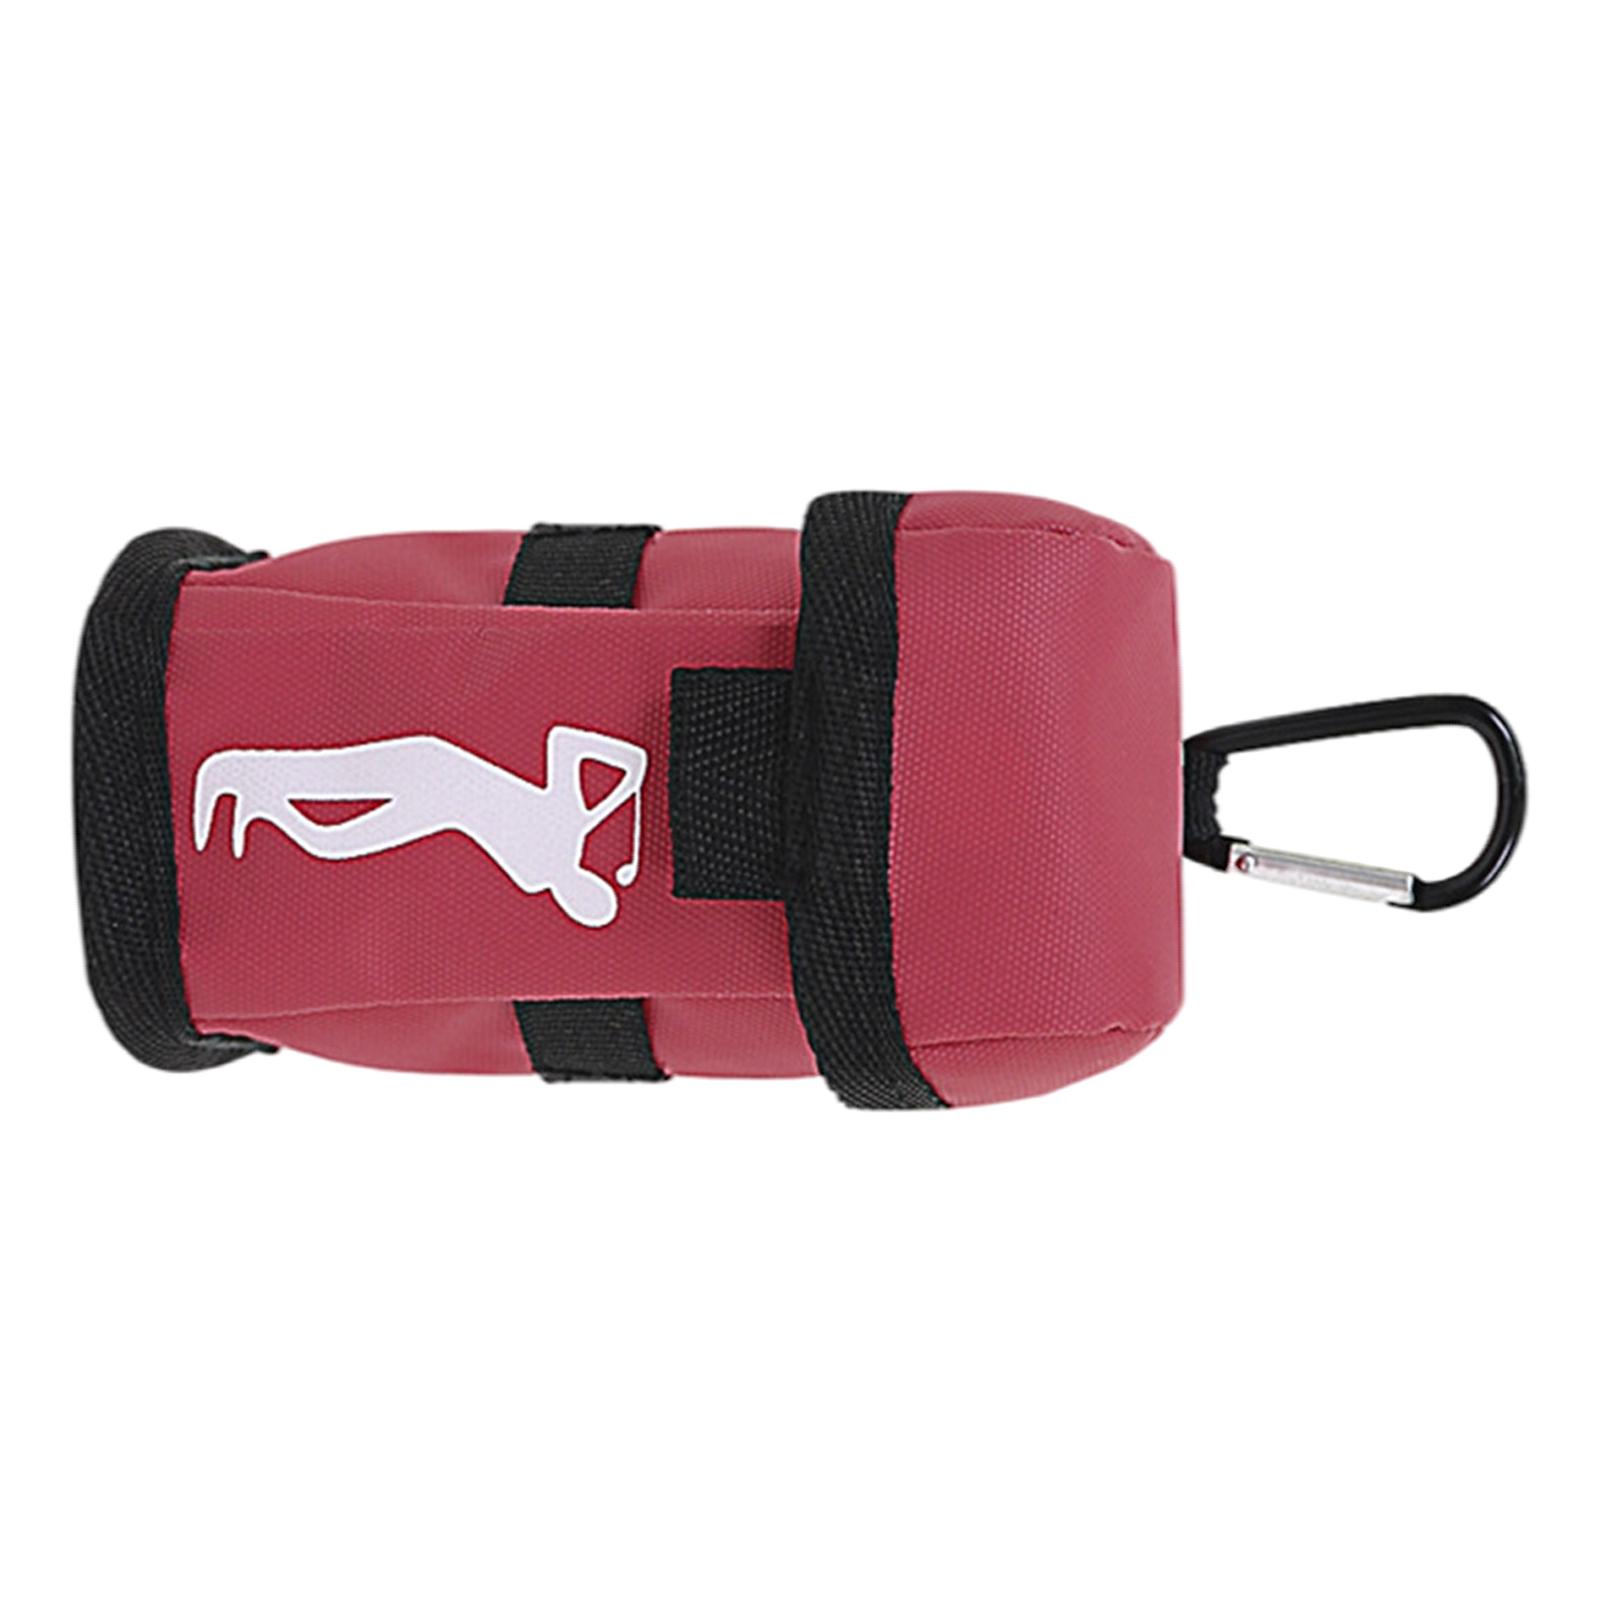 Golf Ball Carry Bag Small Golf Accessories Waterproof Pouch with Hook Red